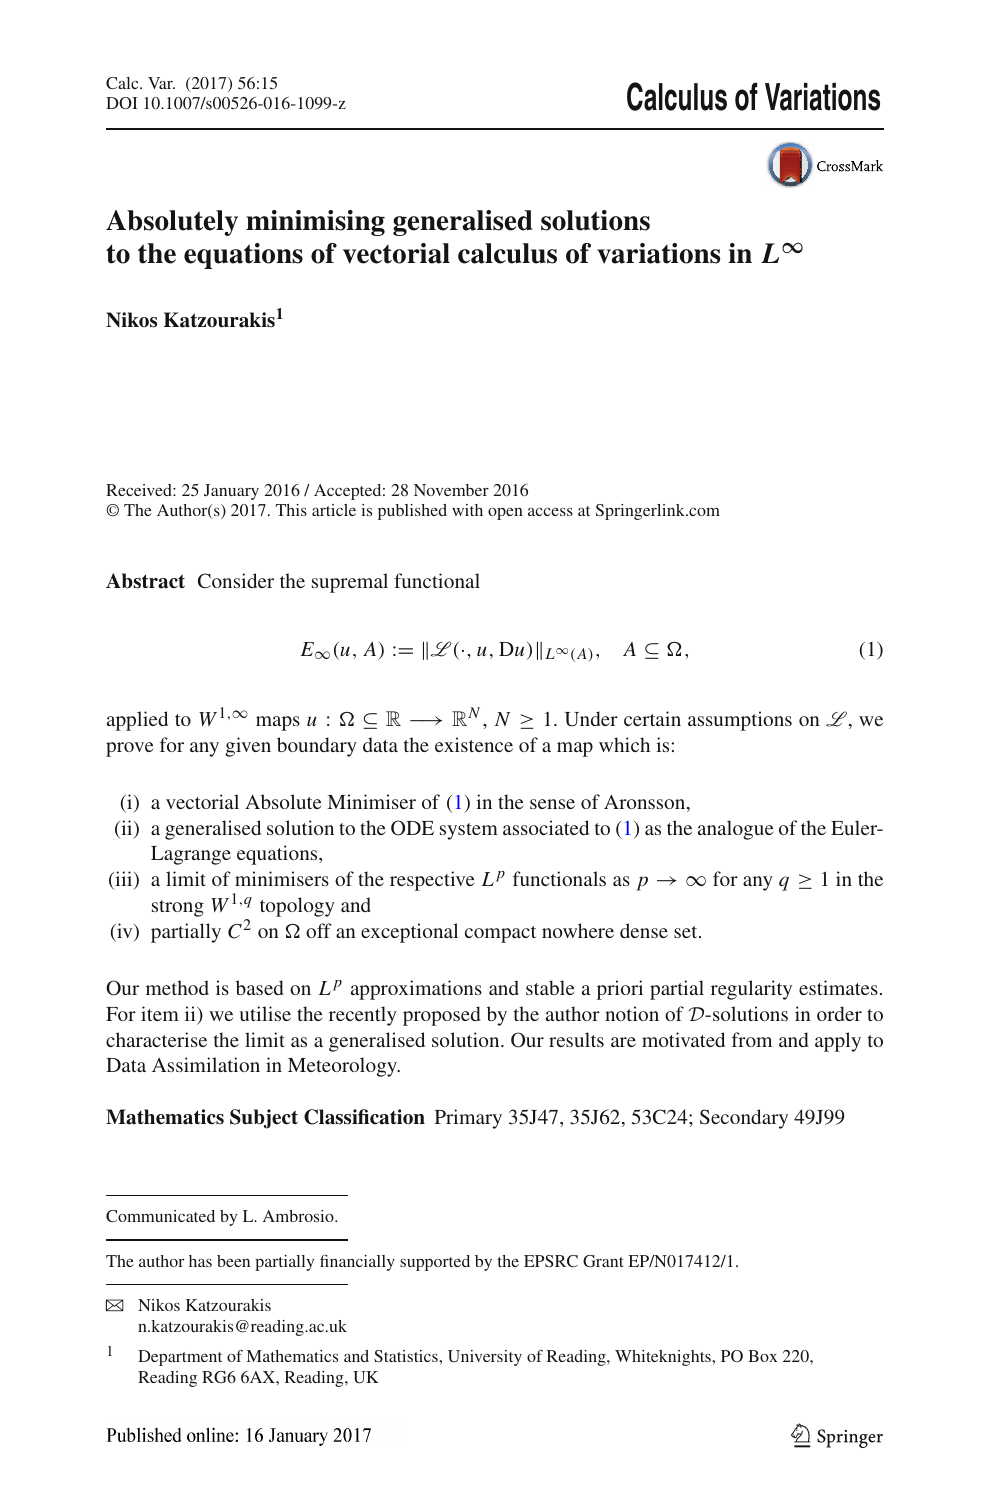 Absolutely Minimising Generalised Solutions To The Equations Of Vectorial Calculus Of Variations In L Infty L Topic Of Research Paper In Mathematics Download Scholarly Article Pdf And Read For Free